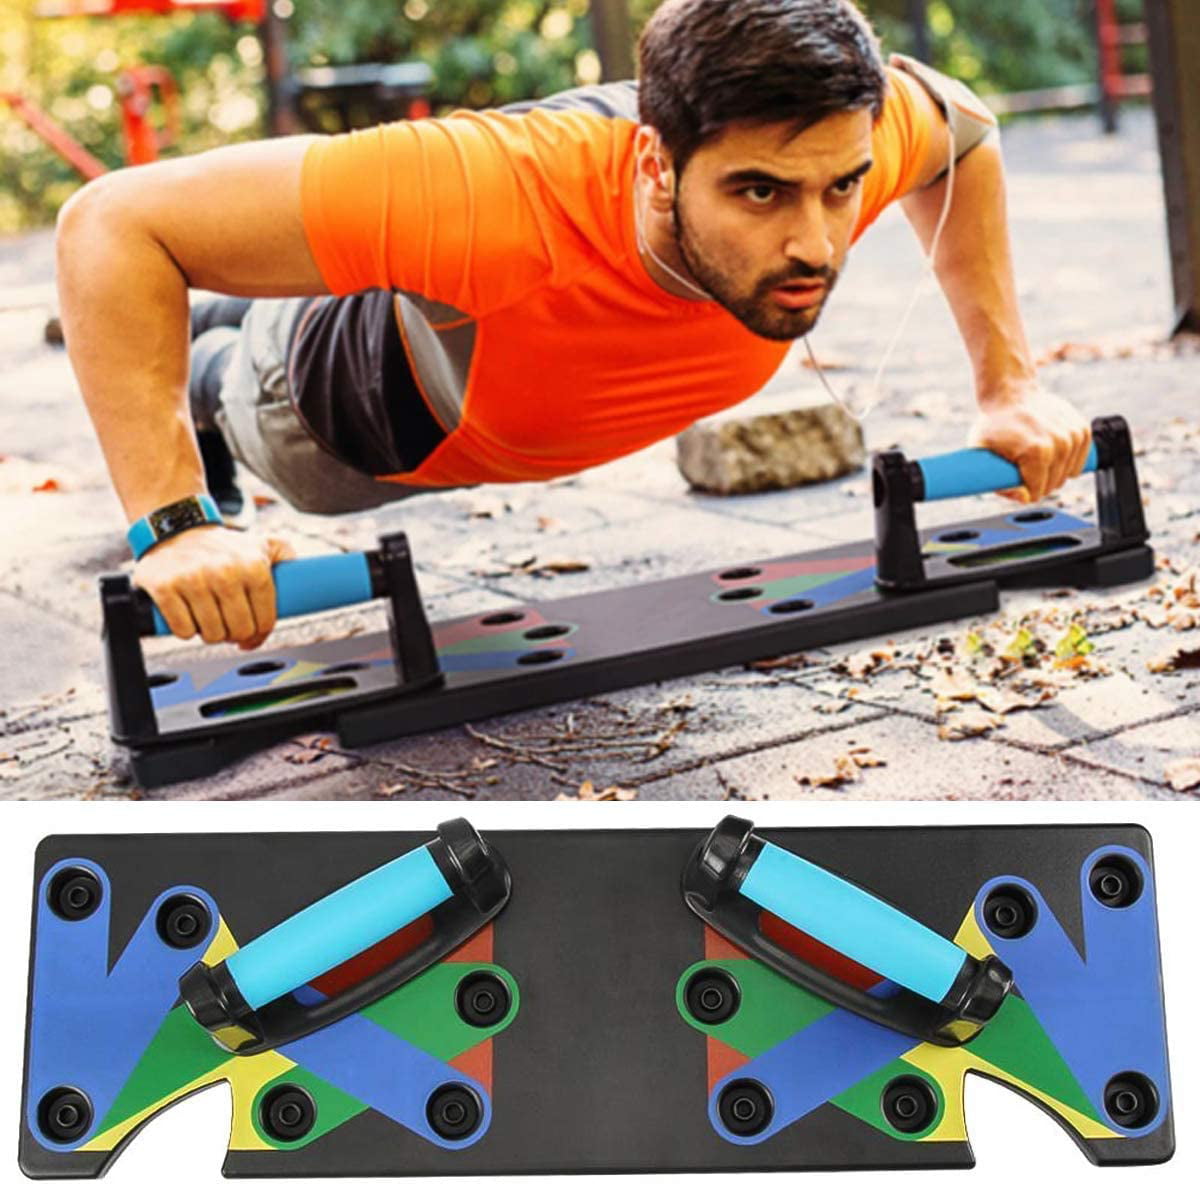 9 in 1 Push-up Board Stand Fitness Workout Gym Chest Muscle Training Exercise A+